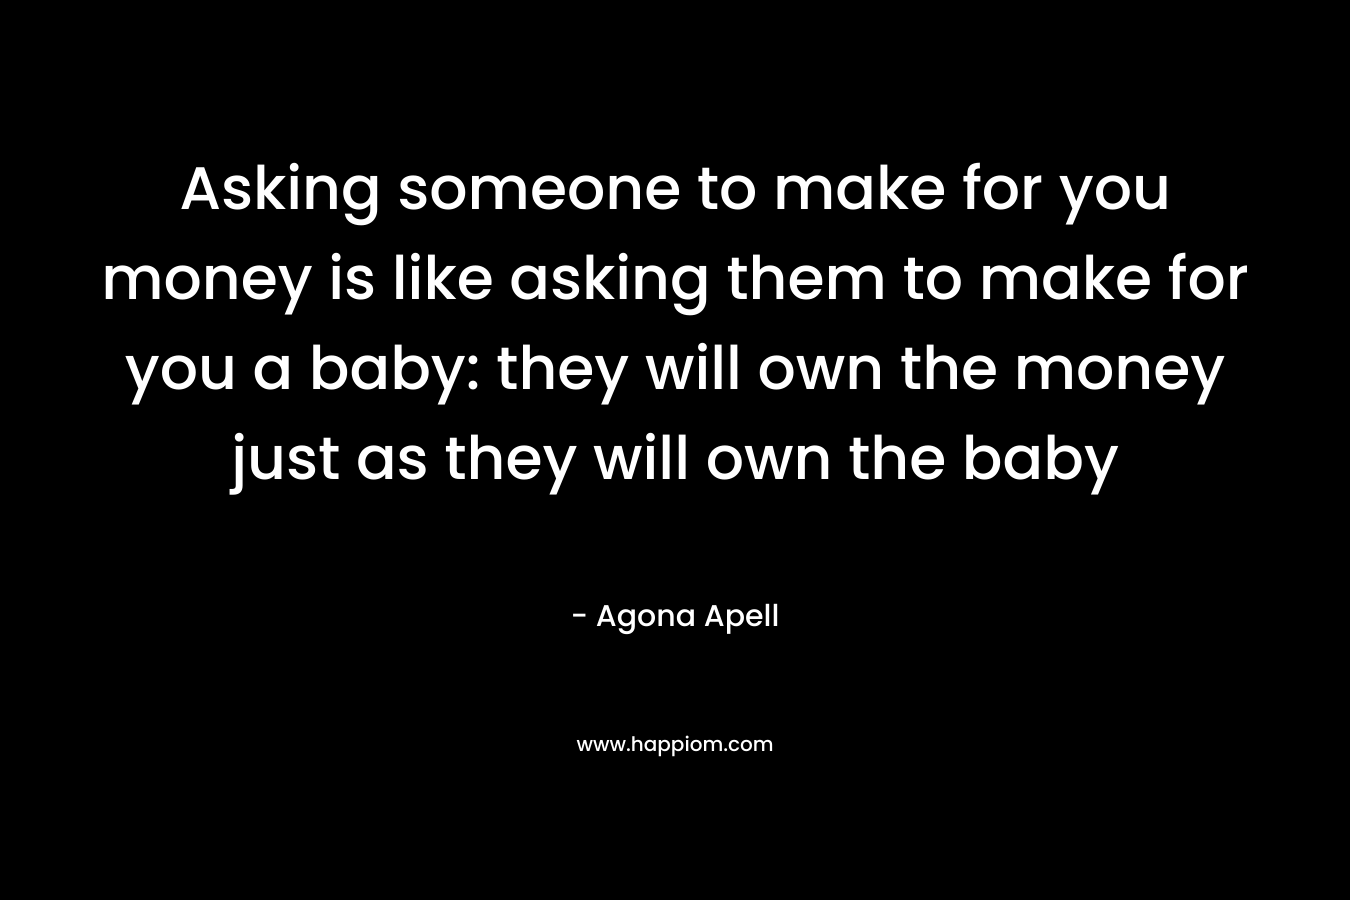 Asking someone to make for you money is like asking them to make for you a baby: they will own the money just as they will own the baby